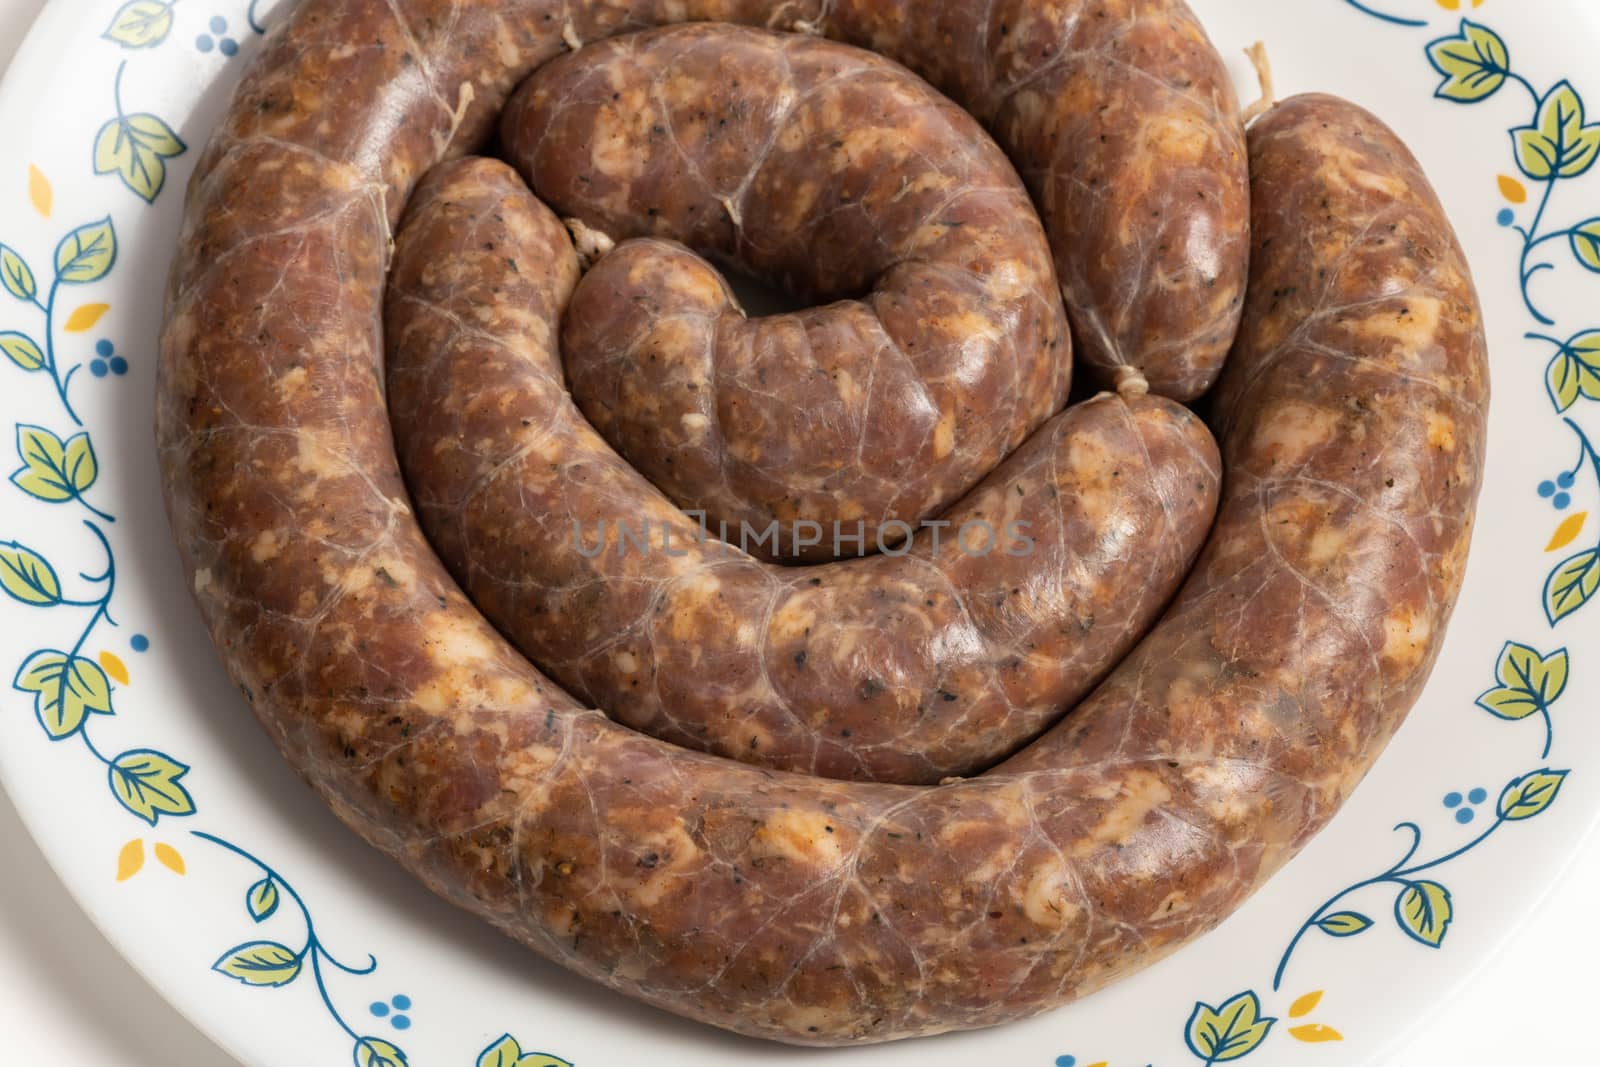 Homemade stuffed pork sausages in a a plate isolated on white.